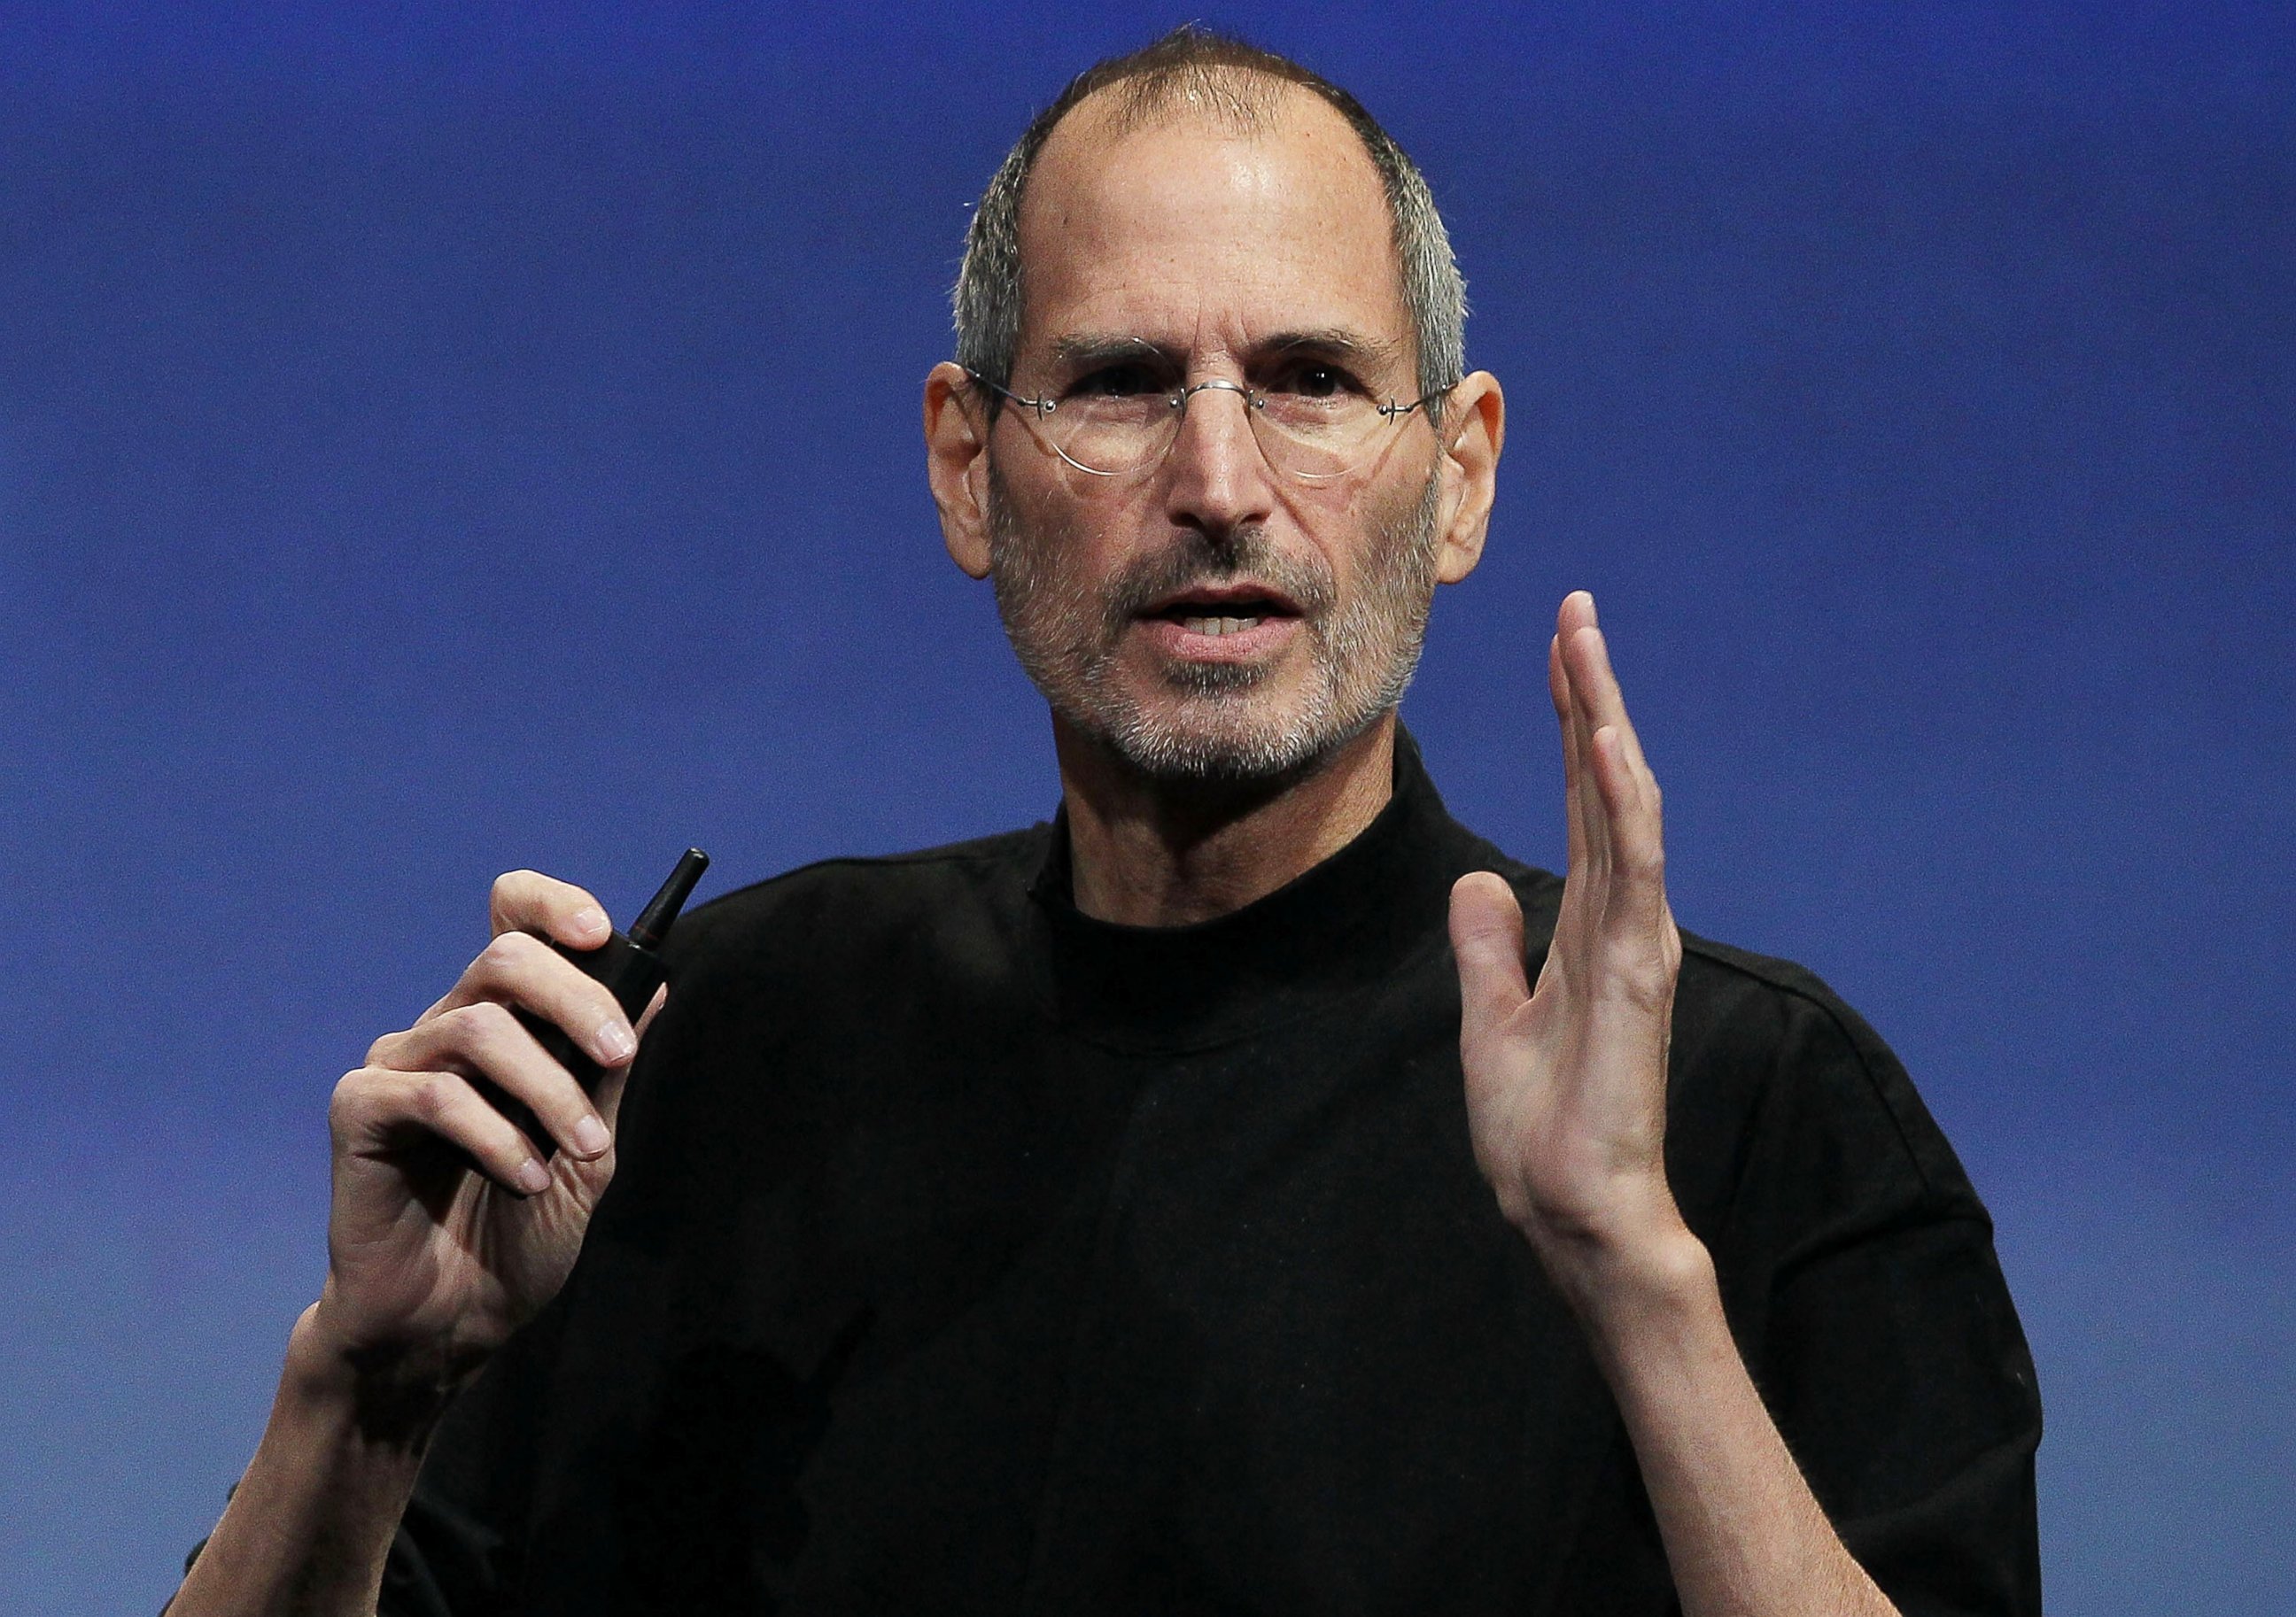 PHOTO: Apple CEO Steve Jobs speaks during an Apple special event in Cupertino, California